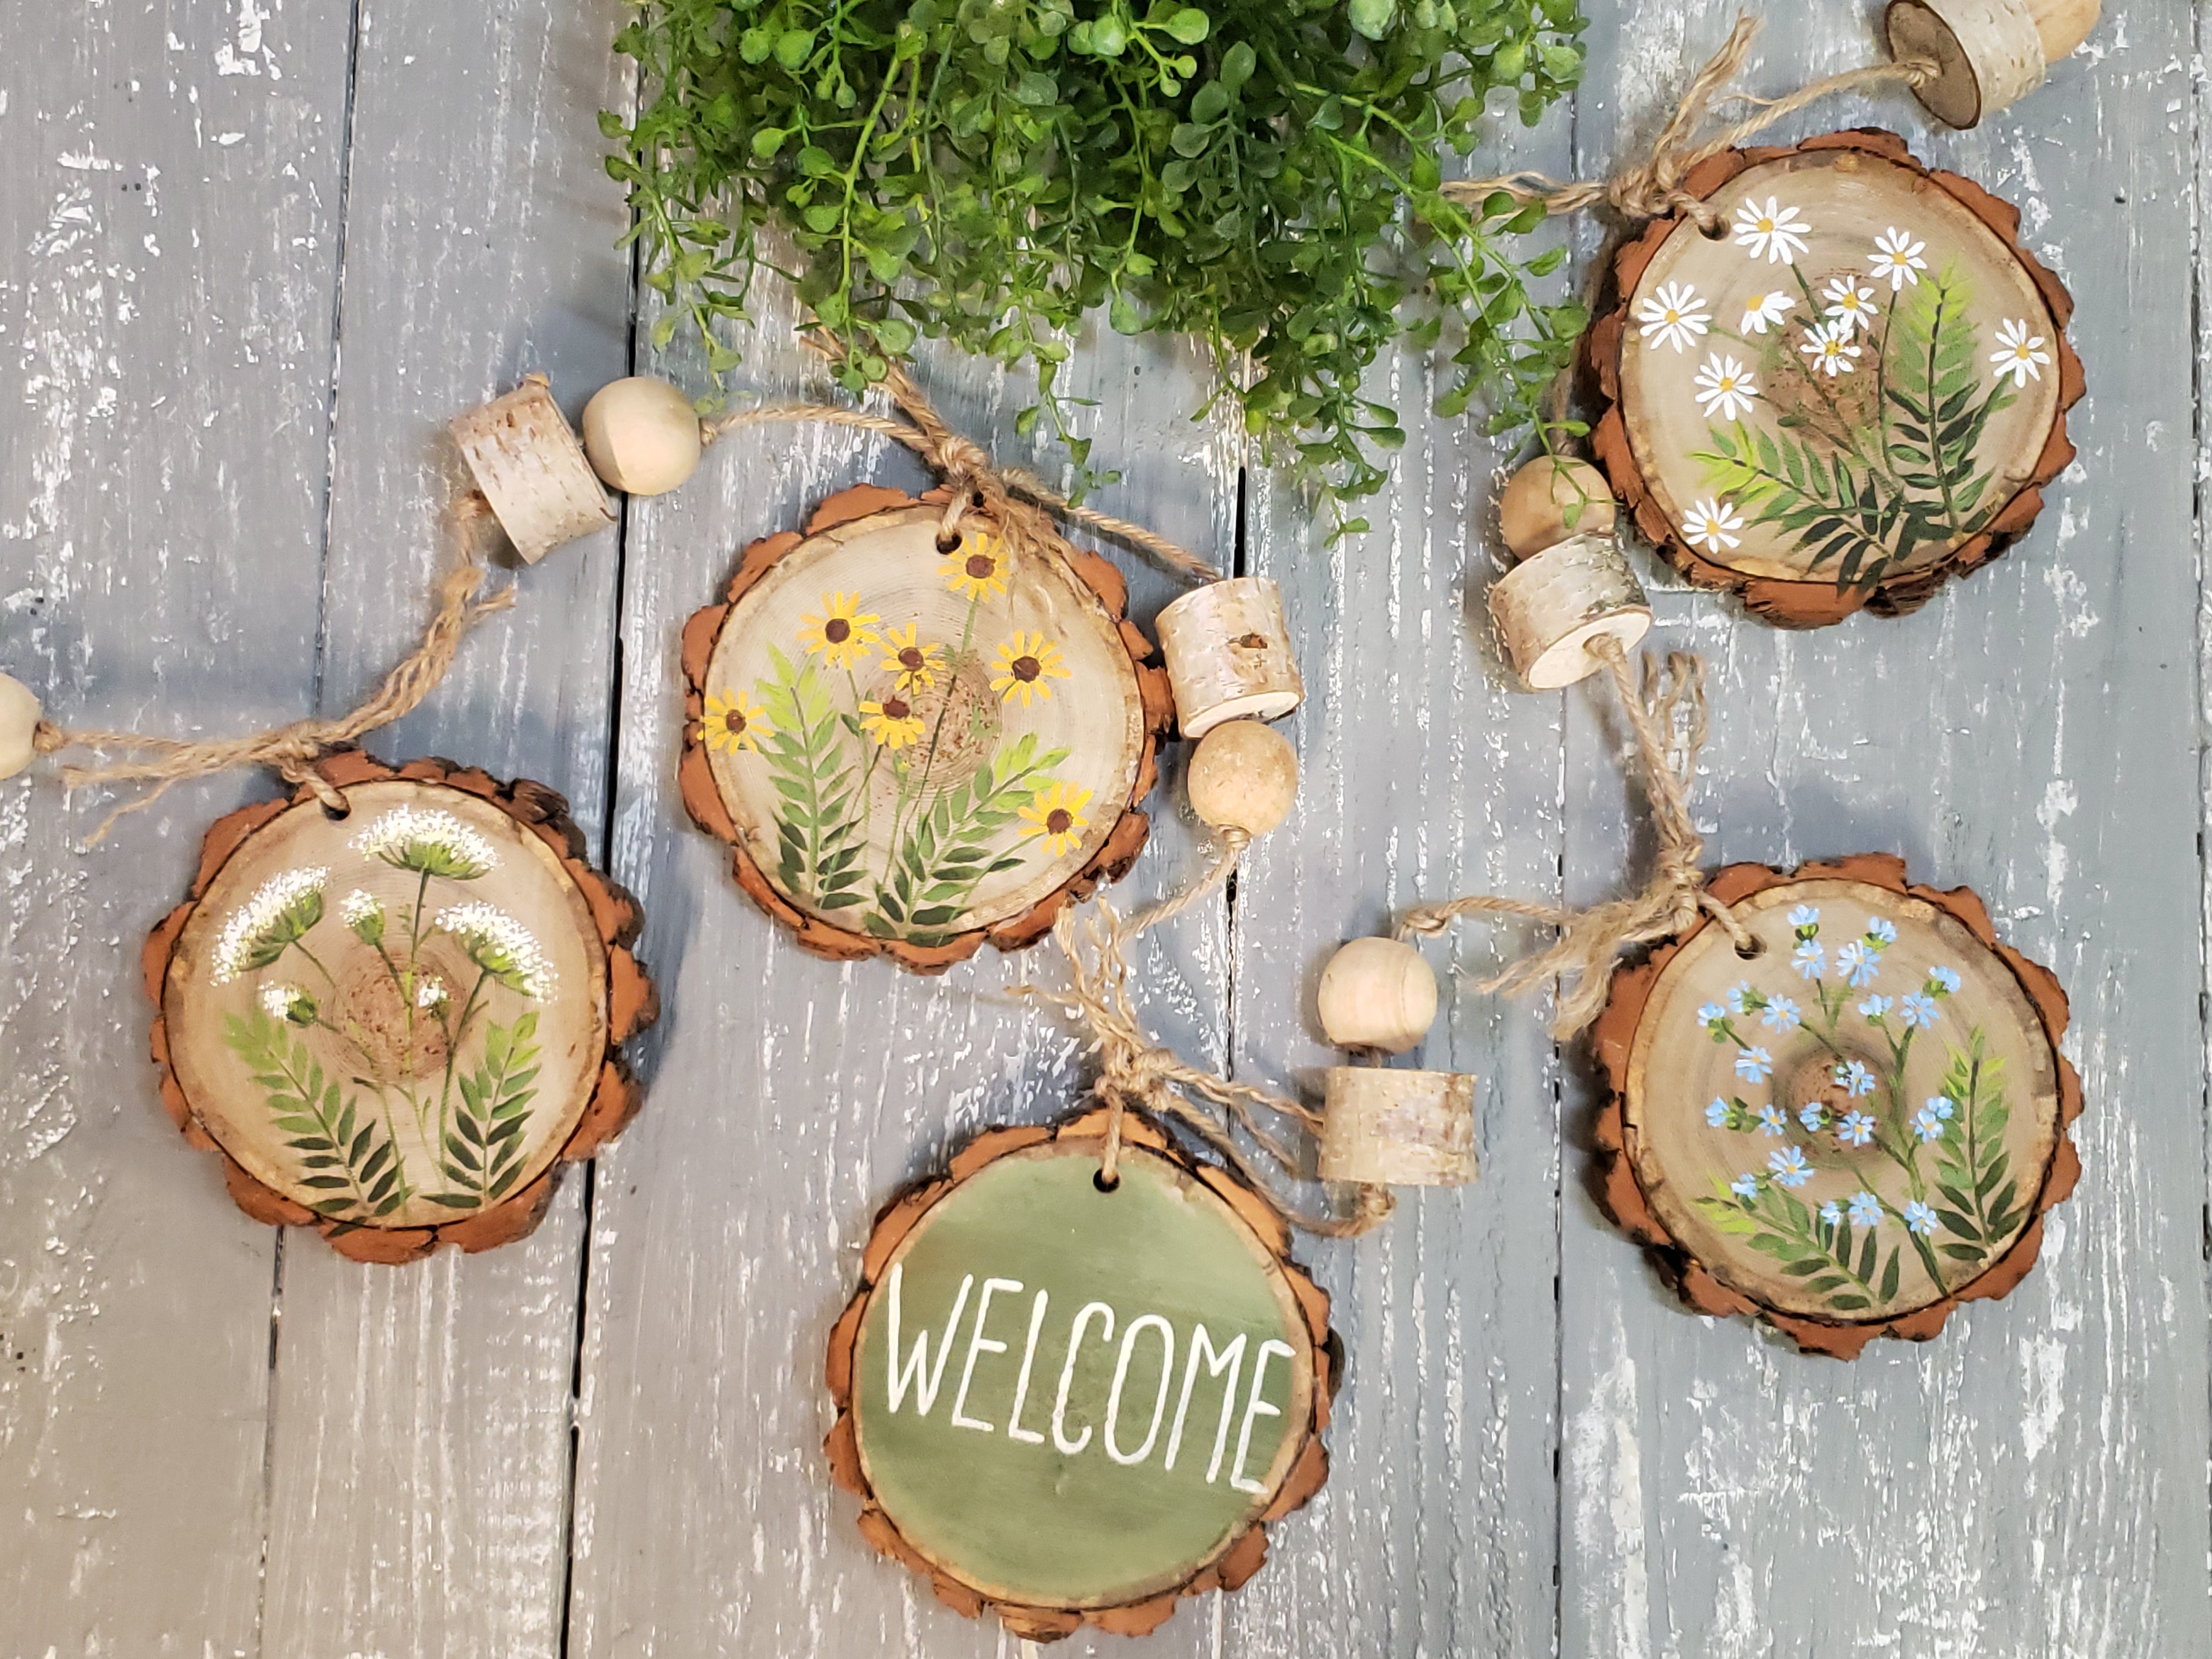 Spring and Summer Bead Garland, Wild flower Rustic Wood Slice ornaments,  Handpainted Rustic Farmhouse mantel garland, porch welcome sign